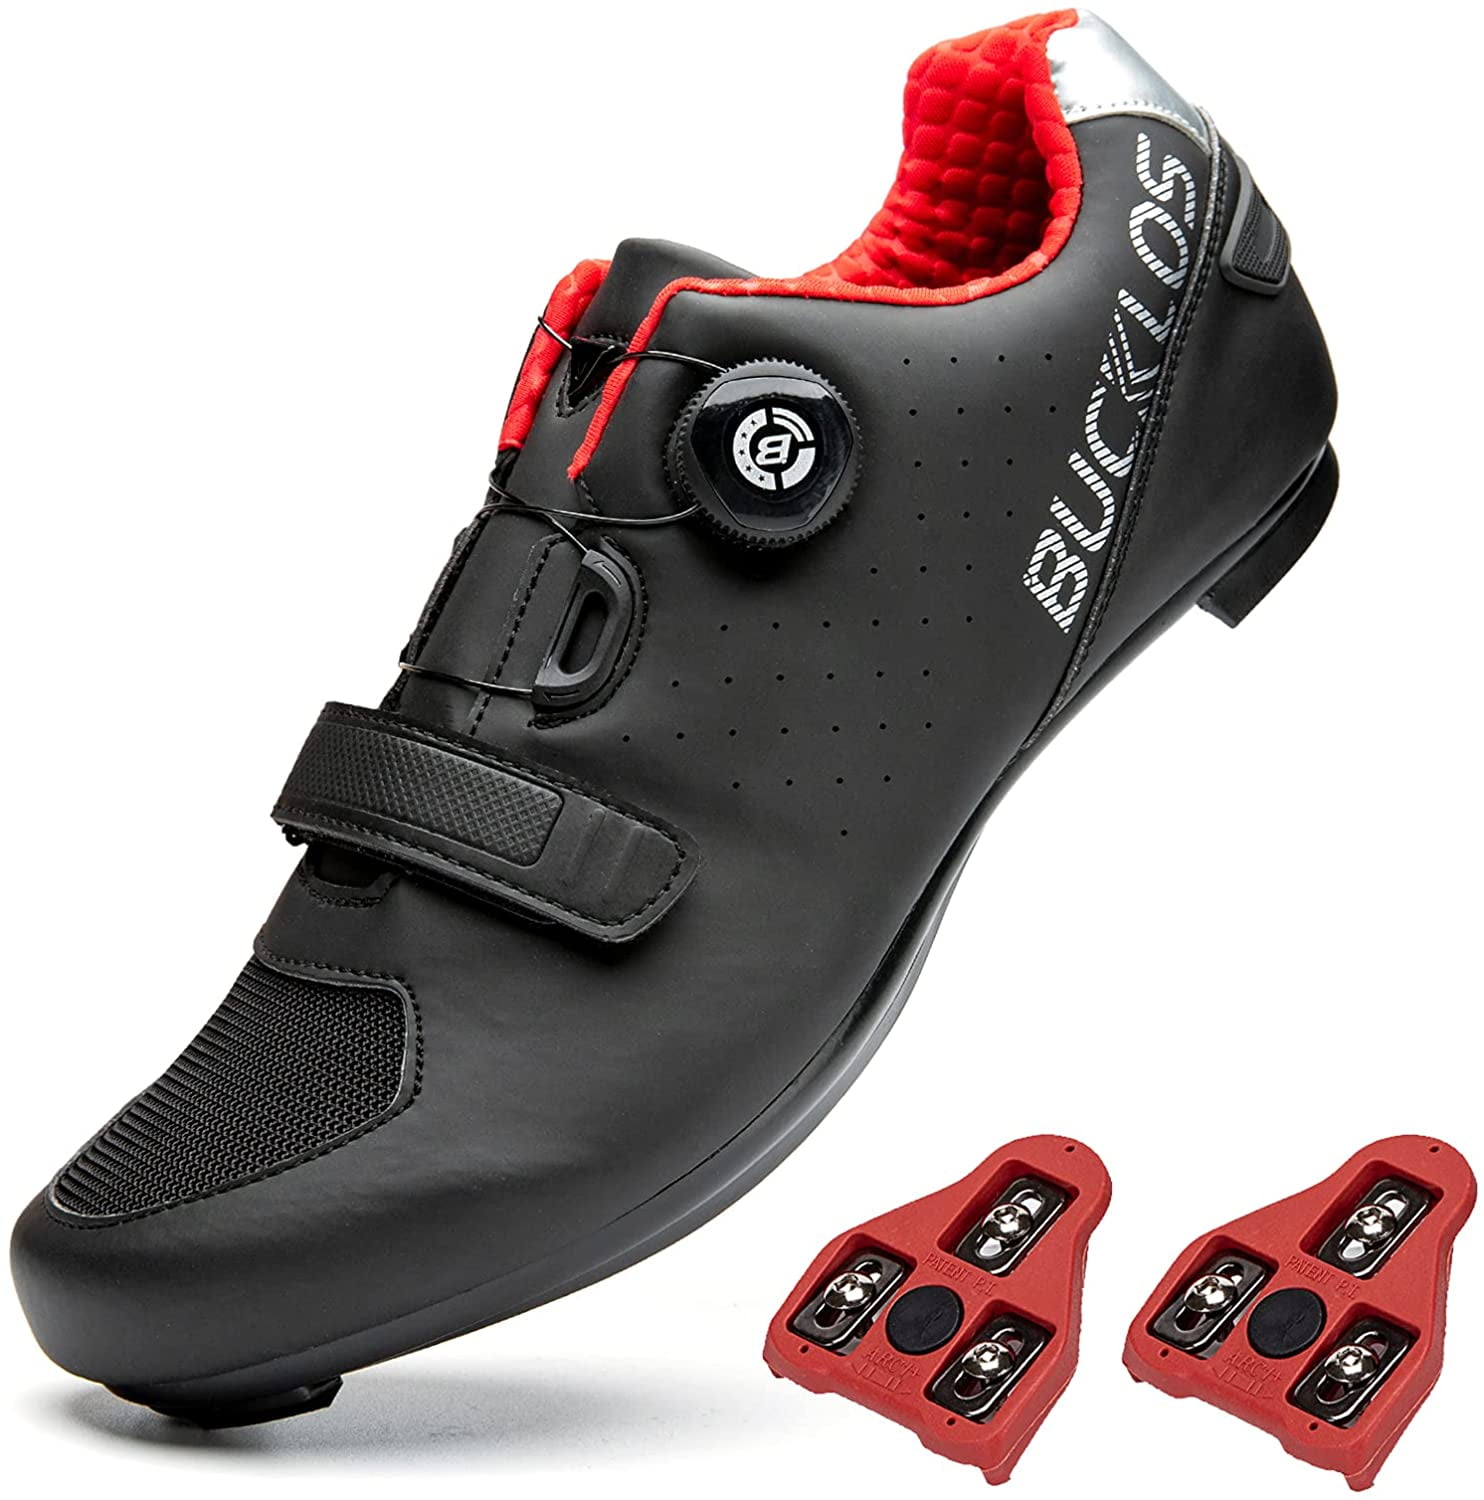 Mountain Bicycle Shoes Fits SPD Lock Cycling Shoes Black/Gray for Women Men 